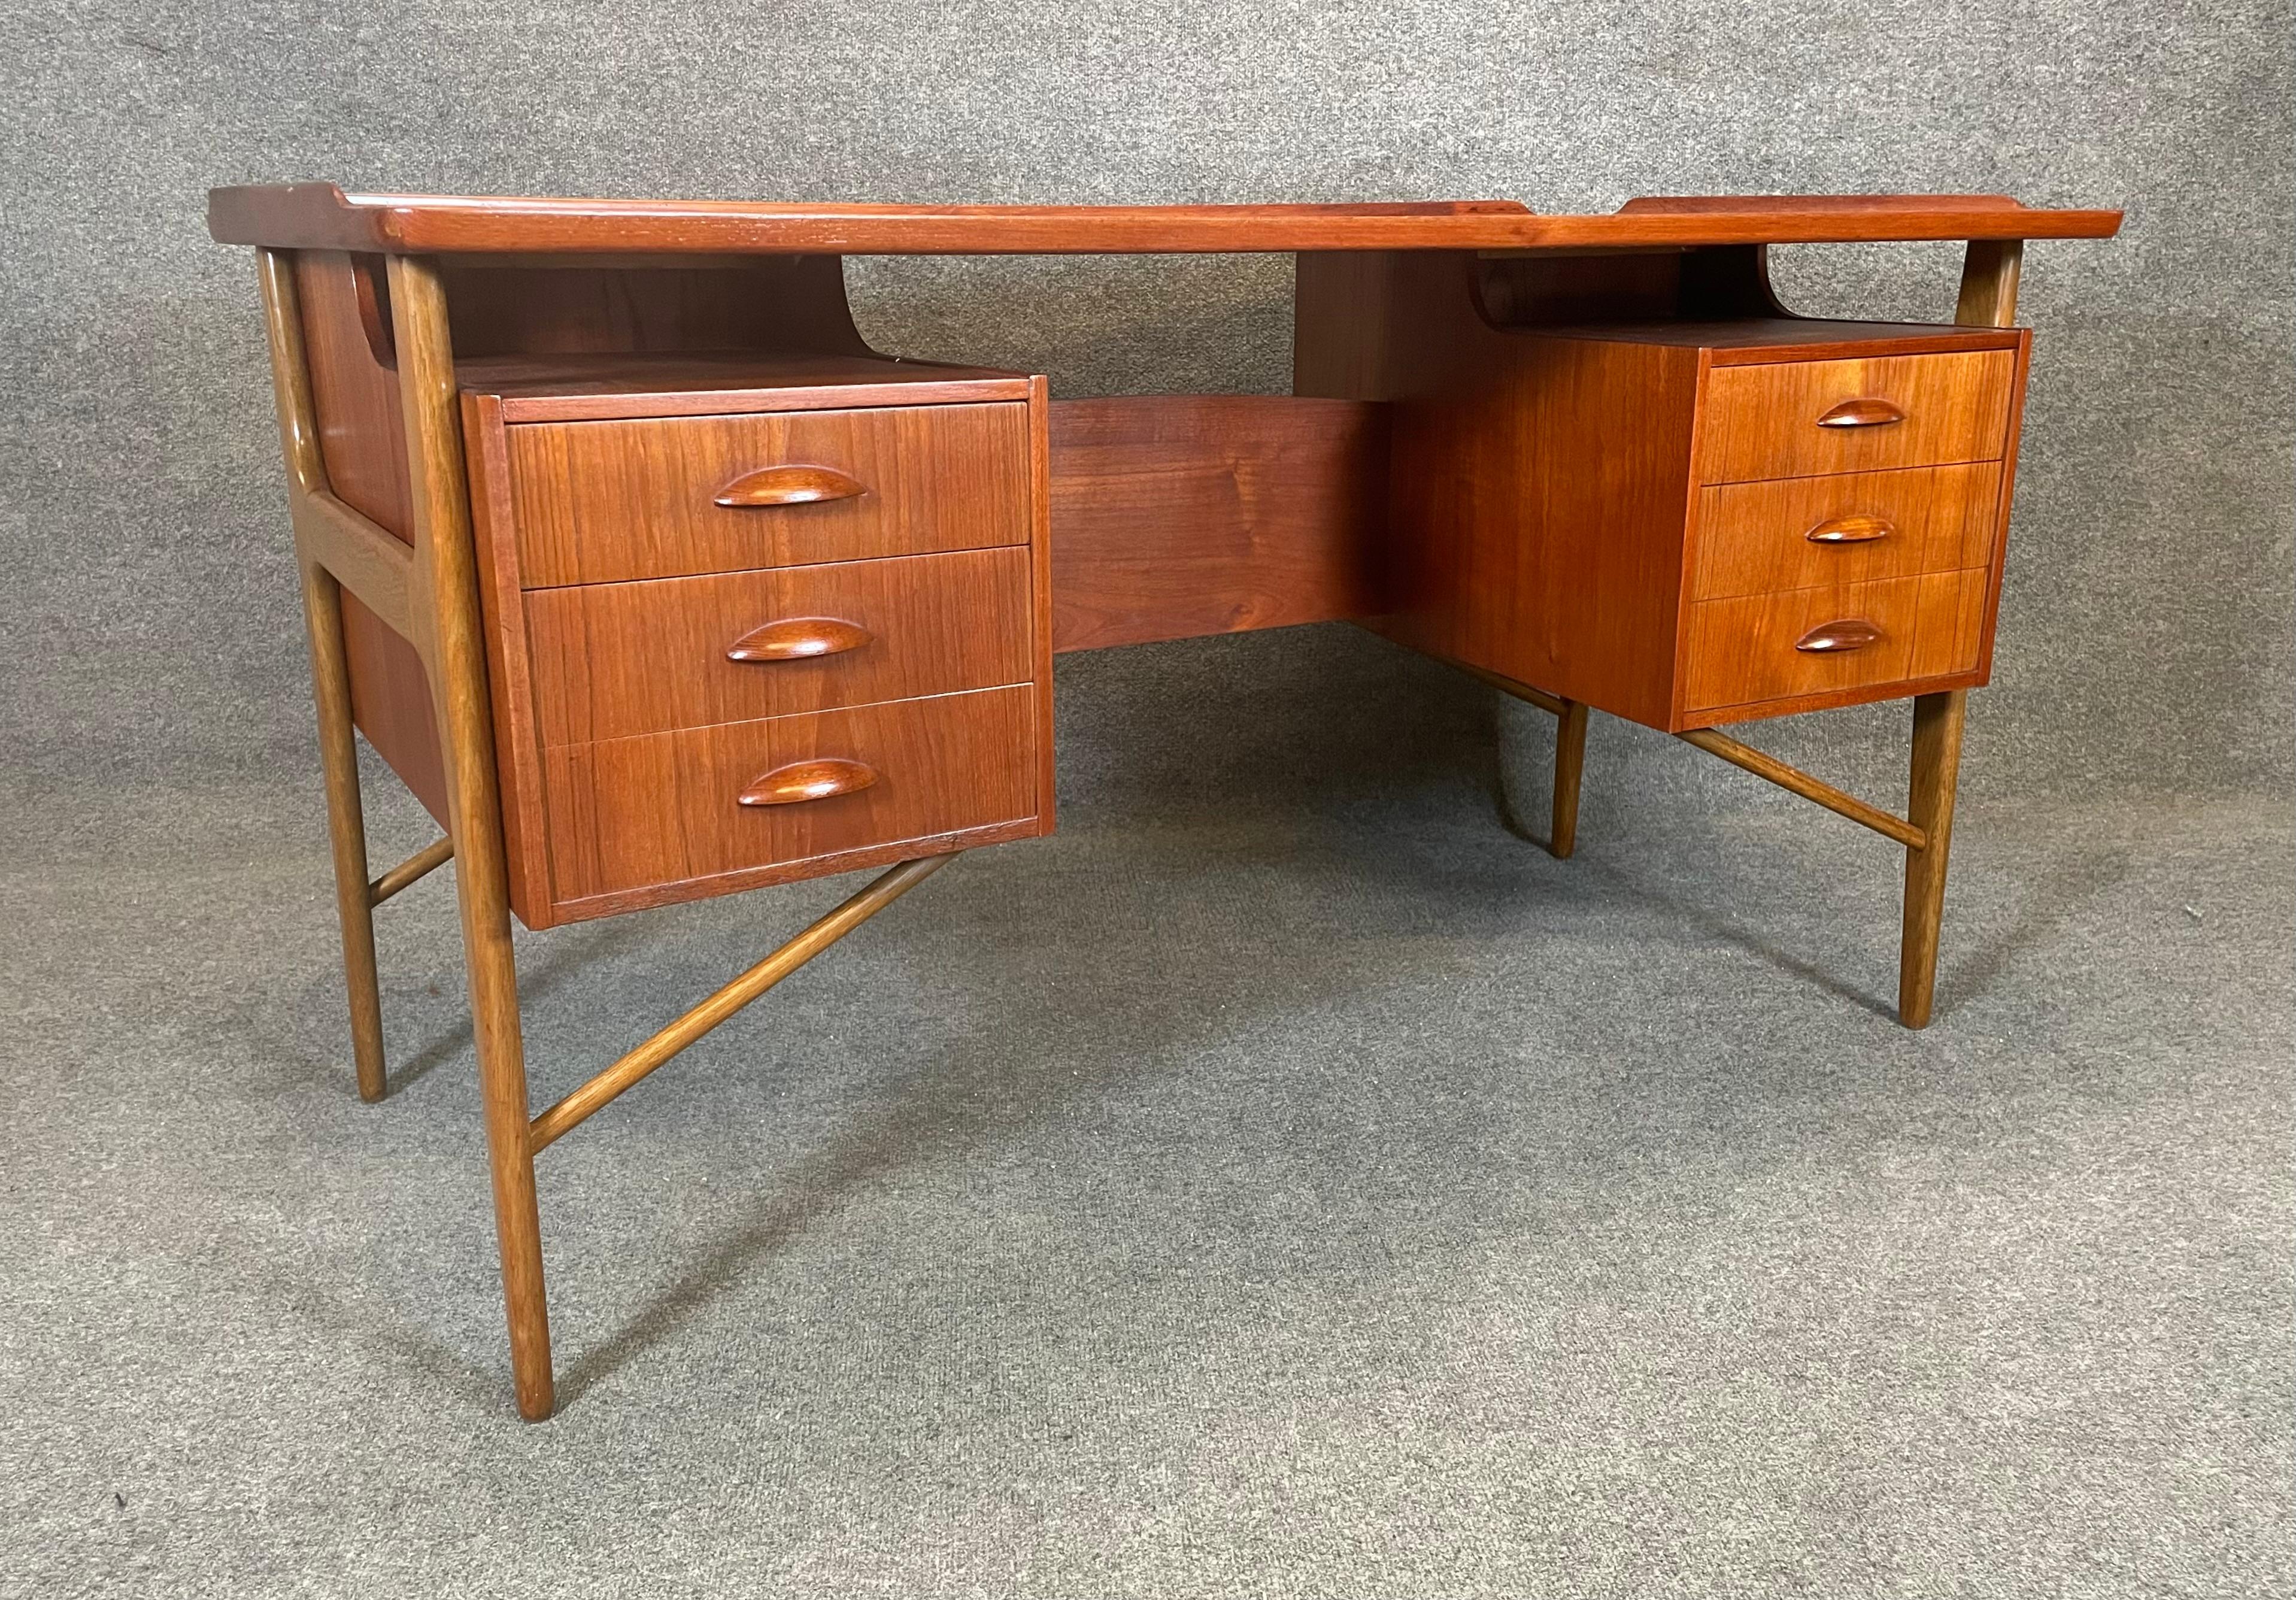 Vintage Danish Mid Century Modern Teak Floating Desk Attributed to Svend Madsen In Good Condition For Sale In San Marcos, CA